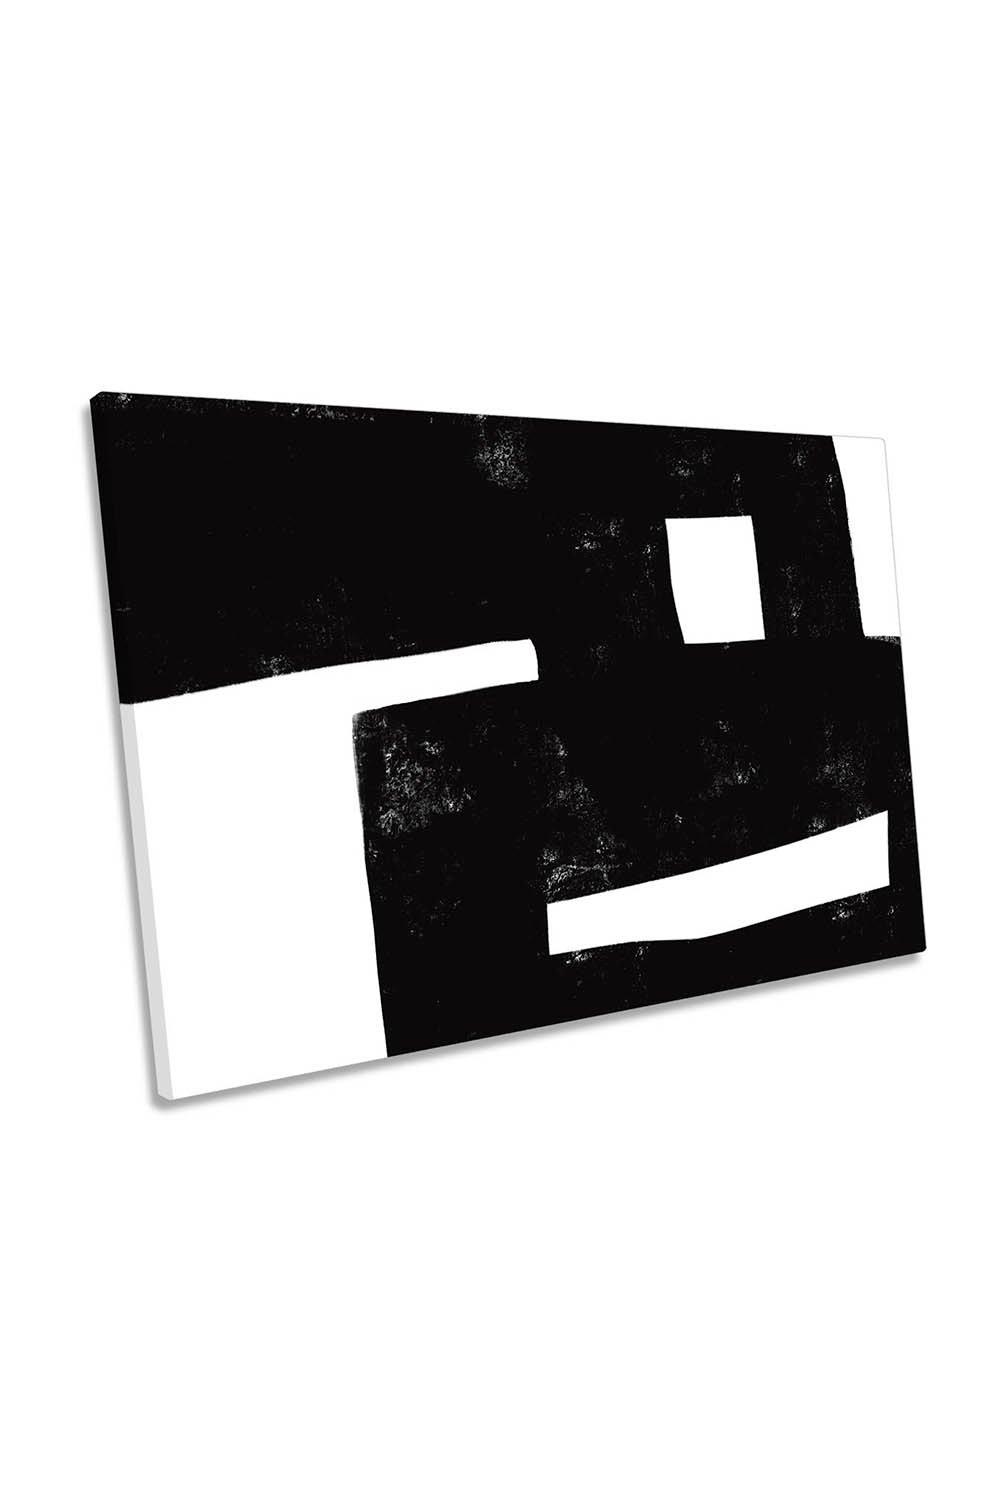 I Was Never There Black and White Abstract Canvas Wall Art Picture Print